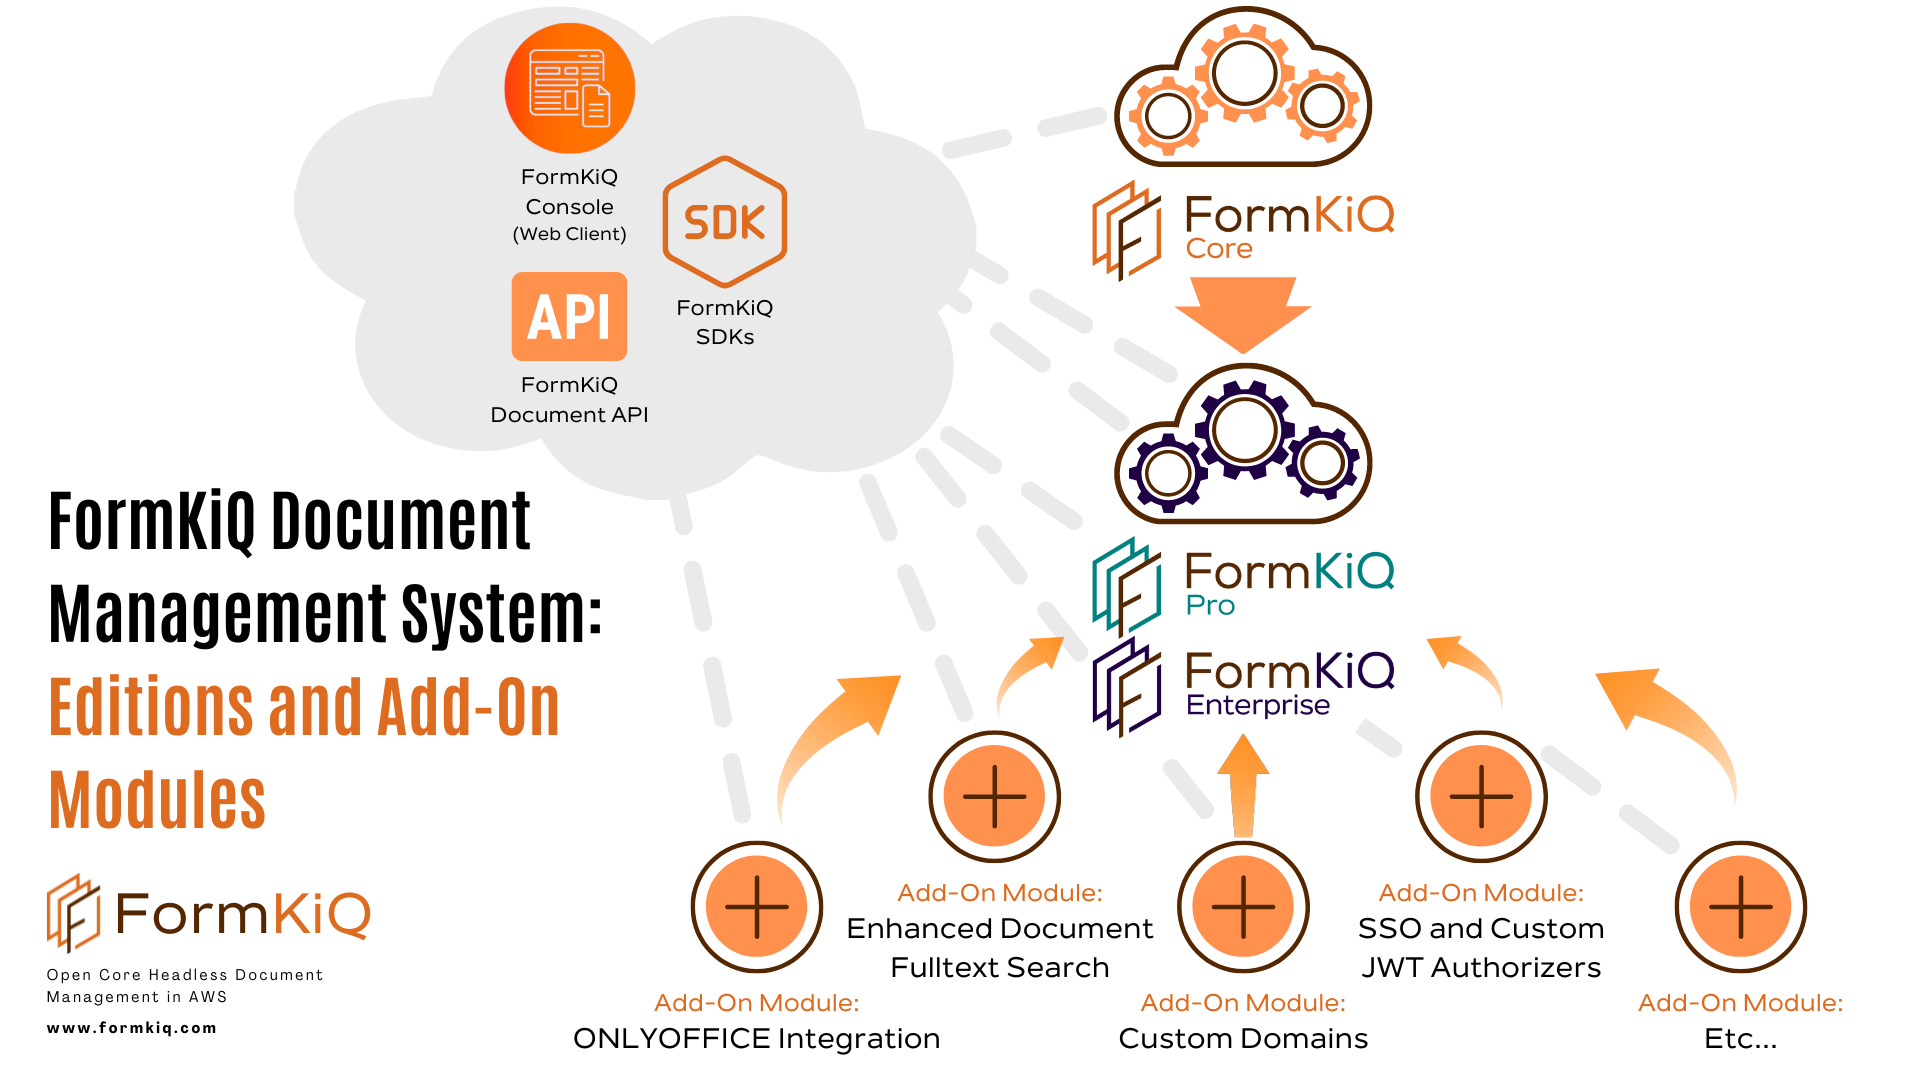 FormKiQ Document Management System: Editions and Add-On Modules